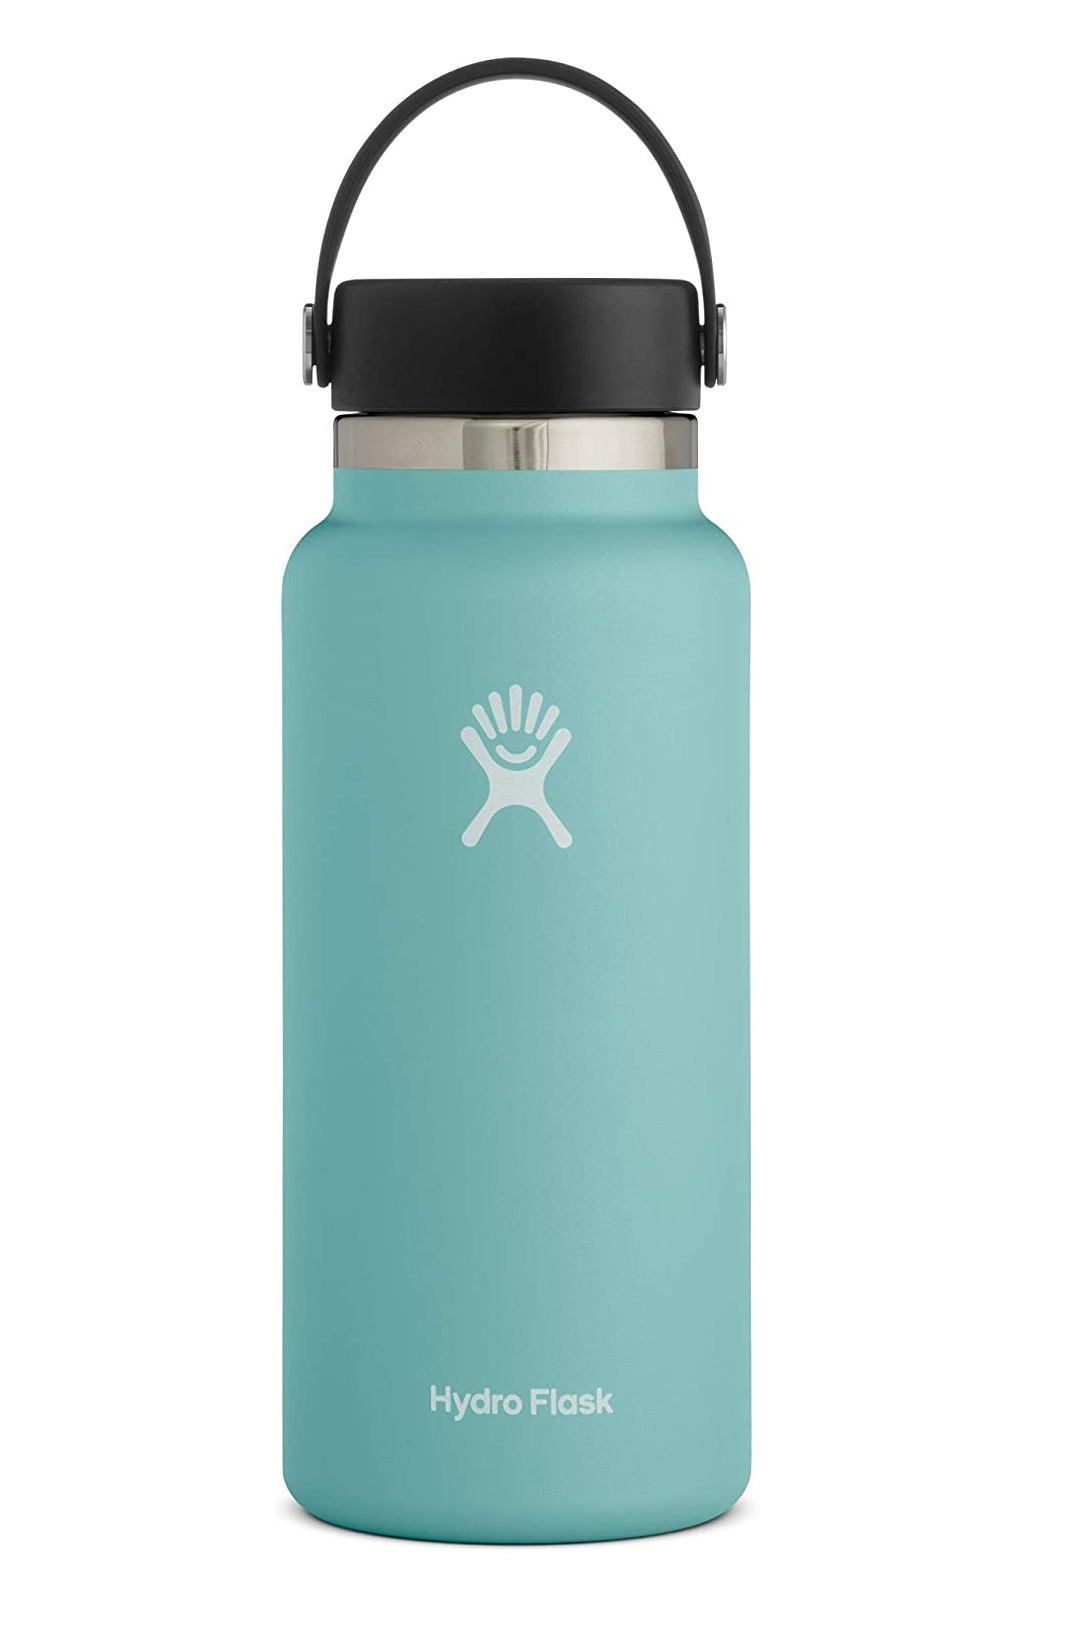 Black Stainless Steel Water Bottle Vacuum Insulated travel Coffee Cup with Flip Lid wide mouth Double Walled leak proof flask keeps Hot & Cold 12 Hours BPA Free 13oz